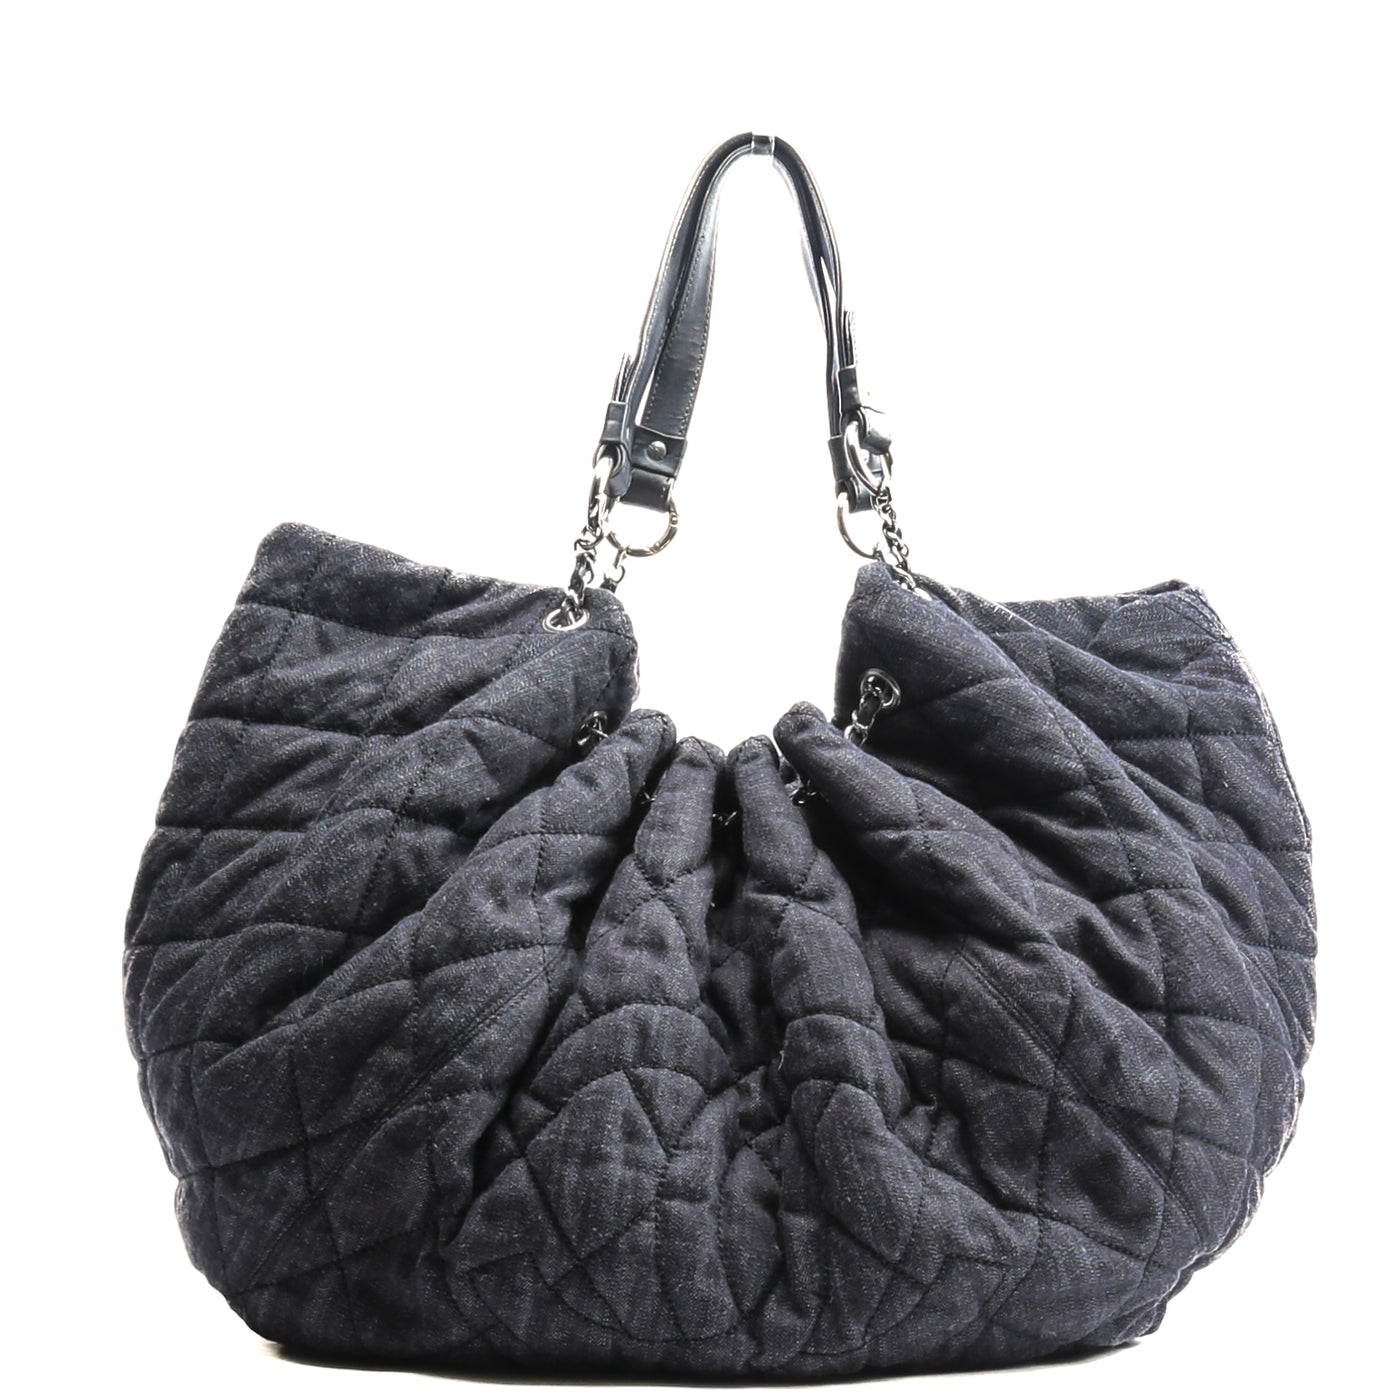 Bags Galore Store - Chanel Coco Cabas Denim XL Extra Large Bag